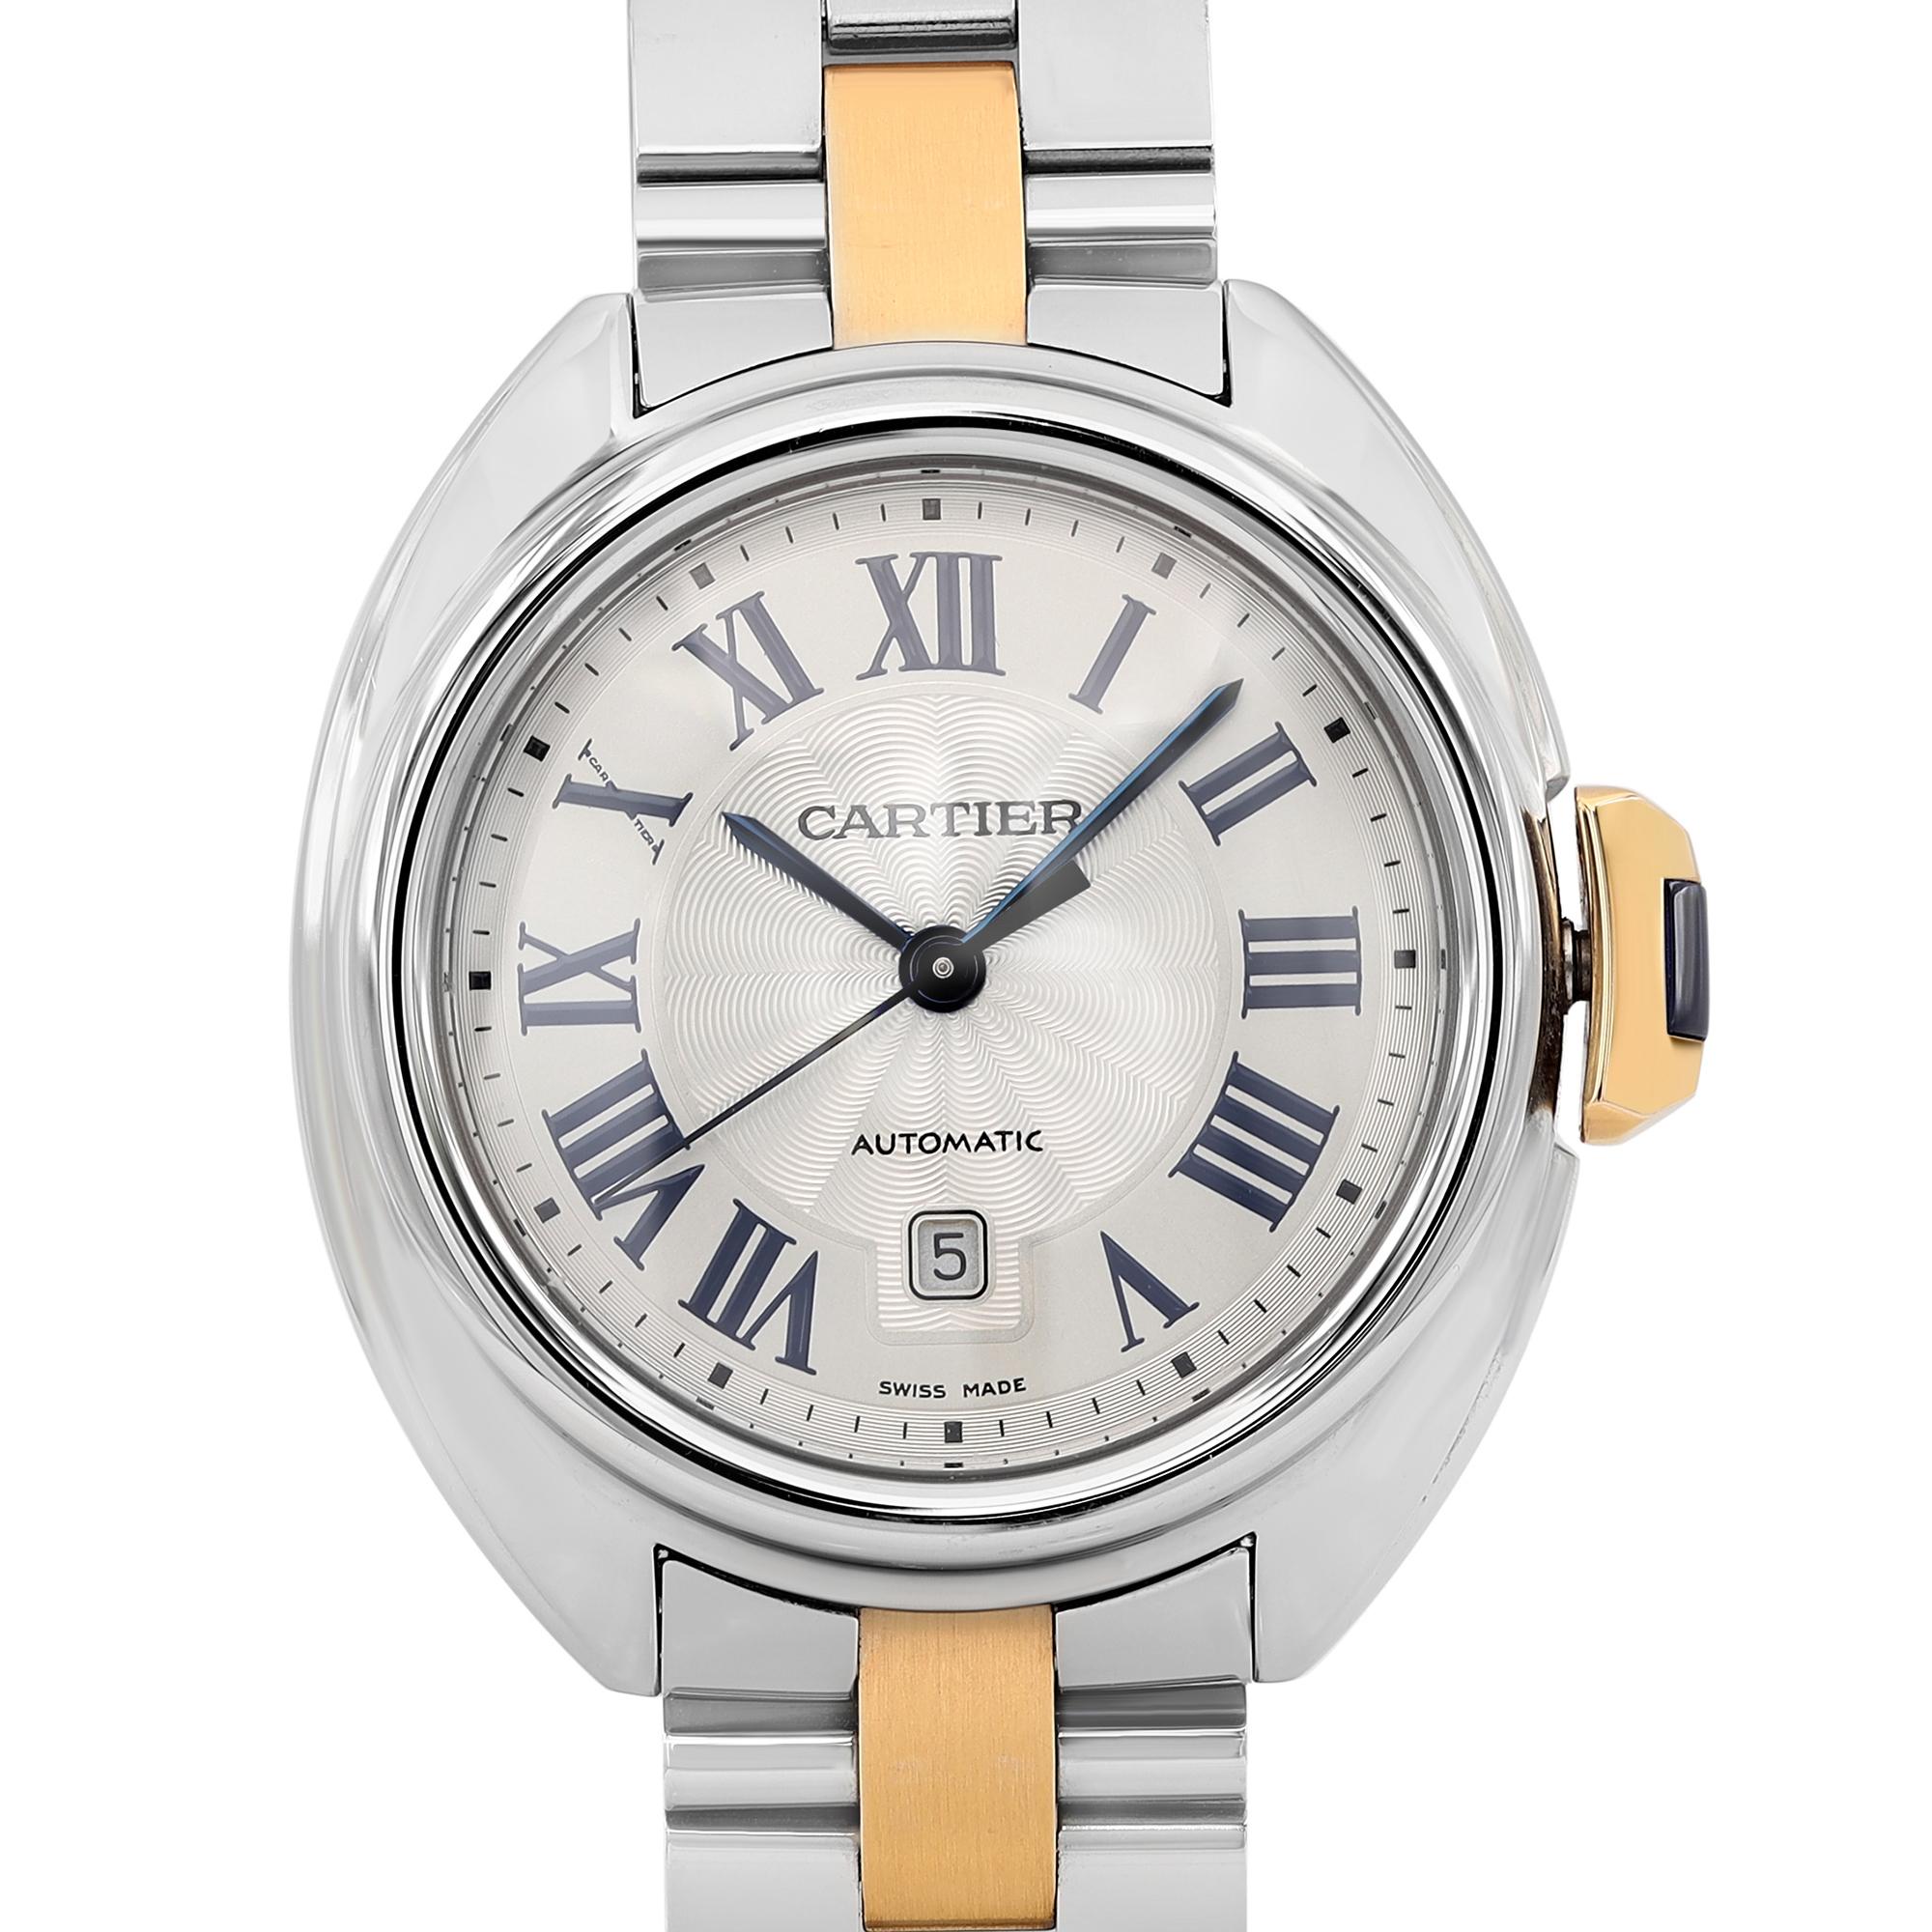 Pre-owned. Wrist size 5.5 inches. 


Brand: Cartier  Type: Wristwatch  Department: Women  Model Number: W2CL0004  Country/Region of Manufacture: Switzerland  Style: Luxury  Model: CARTIER CLE DE CARTIER  Vintage: No  Movement: Mechanical (Automatic)